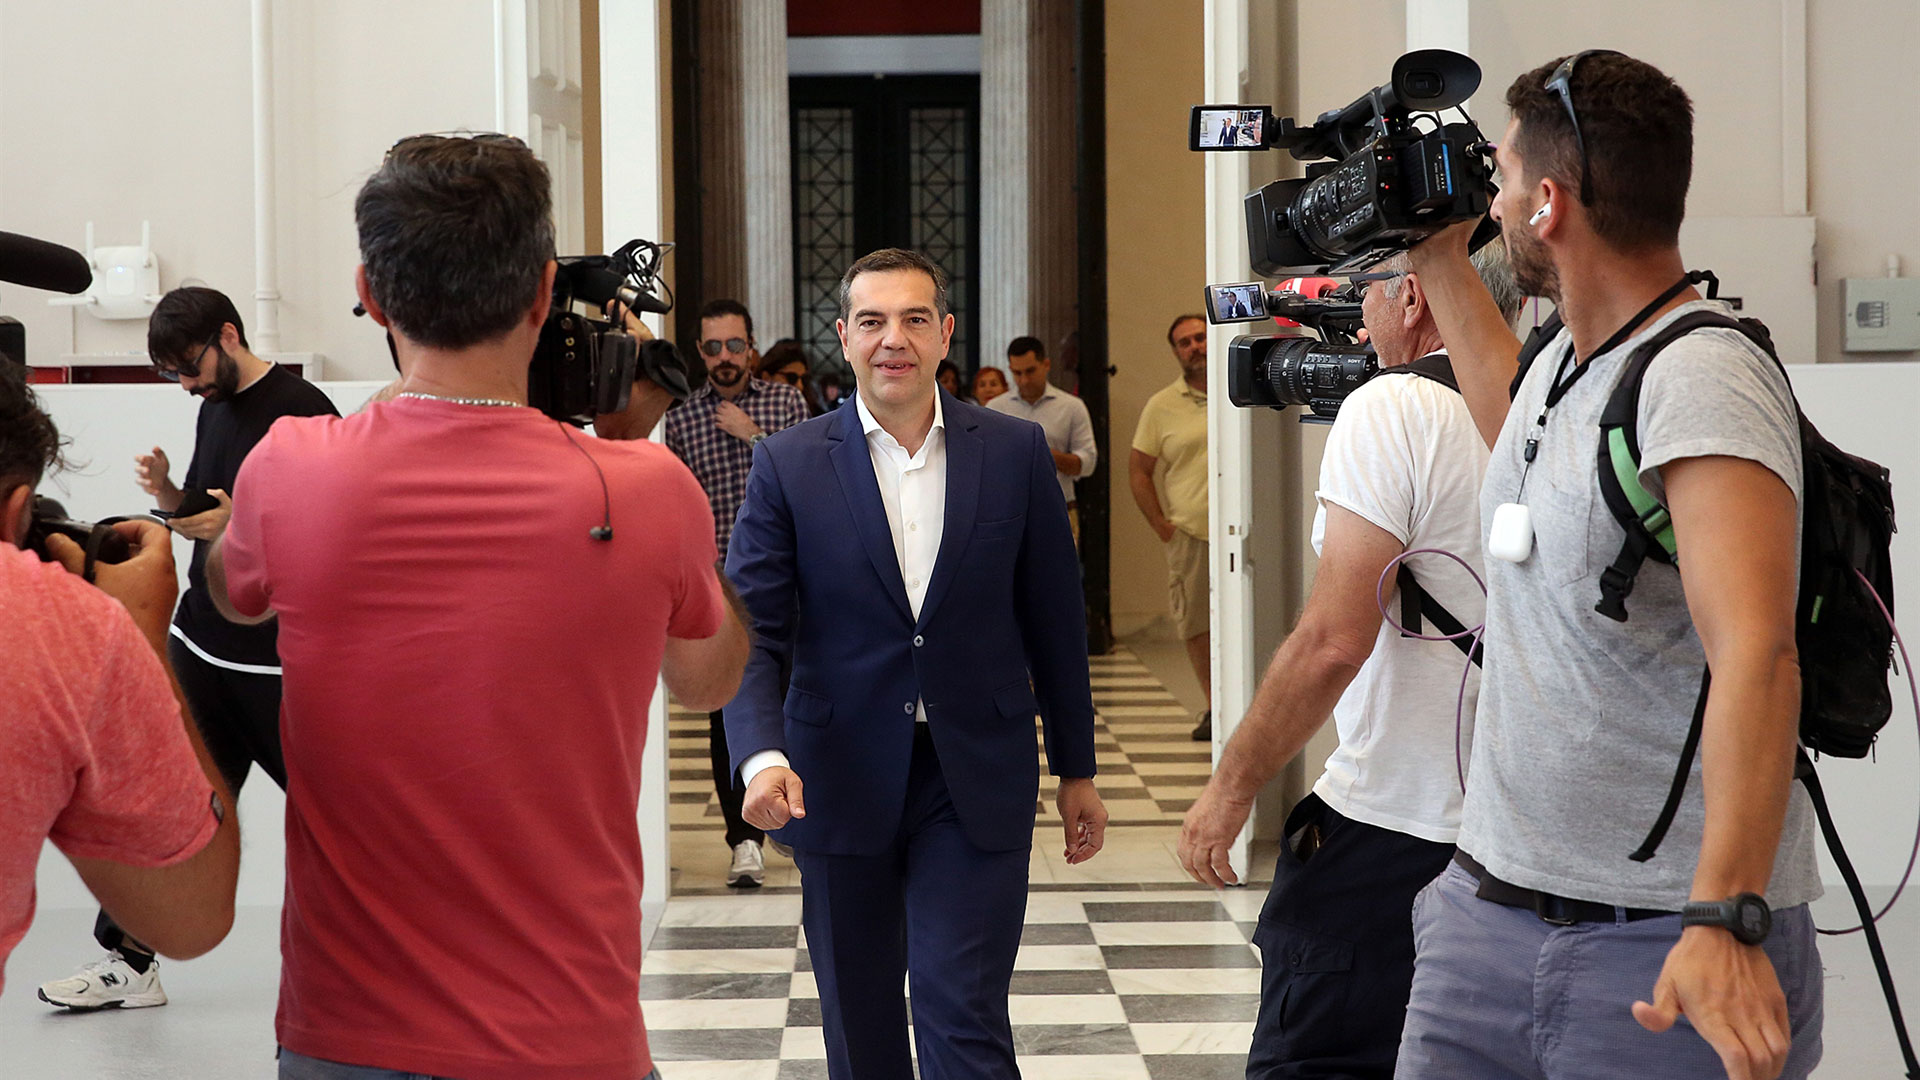 speculation-mounts-over-new-syriza-leader-following-tsipras-resignation1